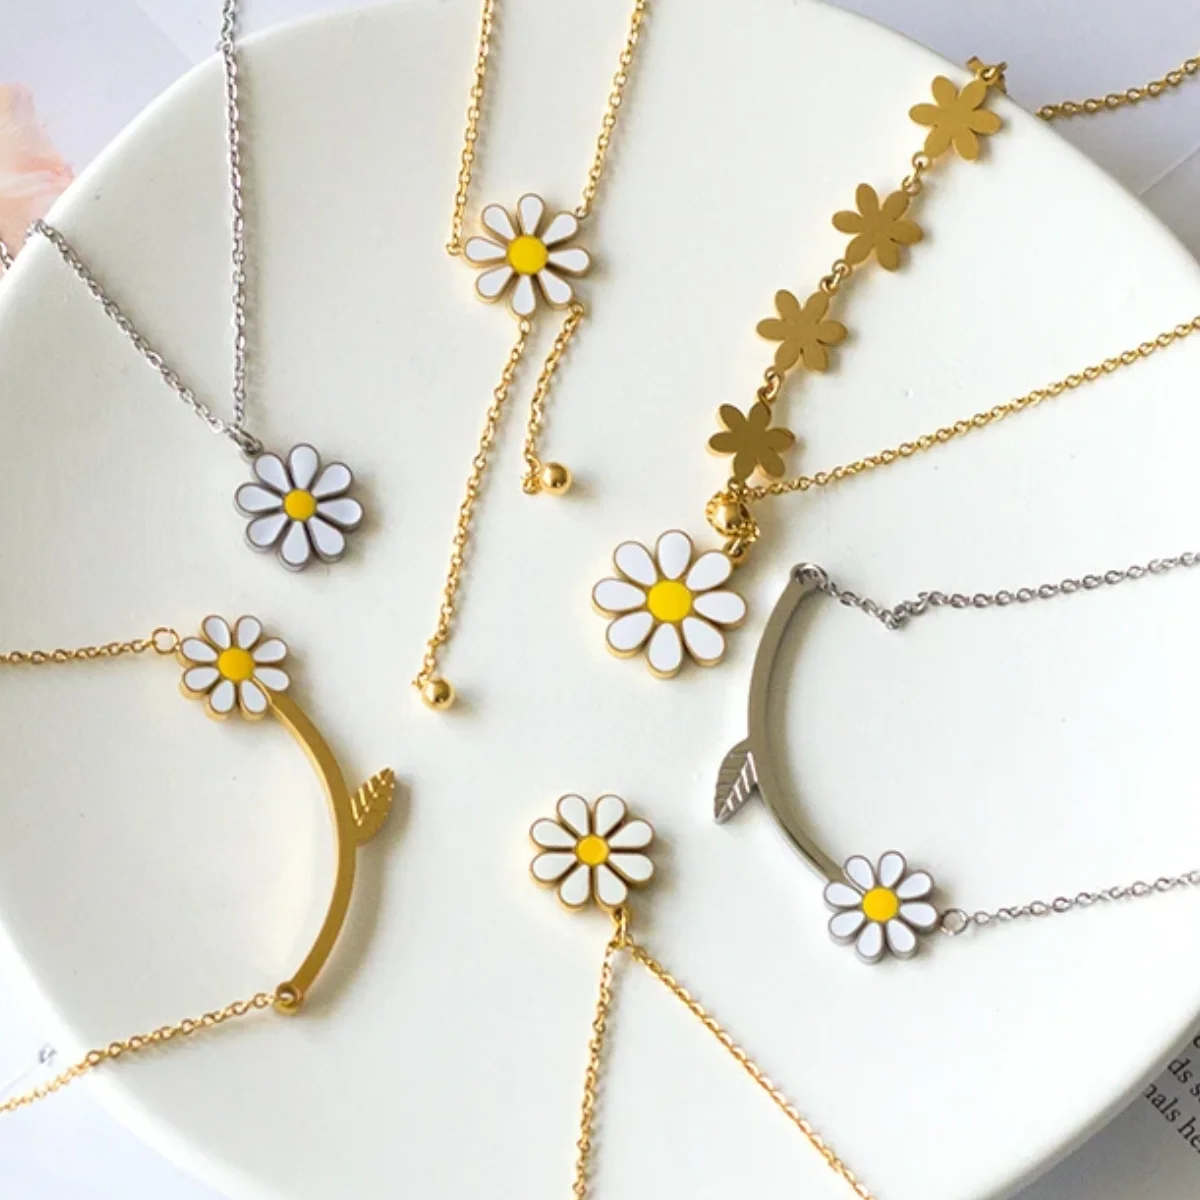 Daisy Flower Necklace for Women/Girls Y2K Summer Jewellery Stainless Steel Cute Yellow Daisies Fashion Choker Maldives Romantic